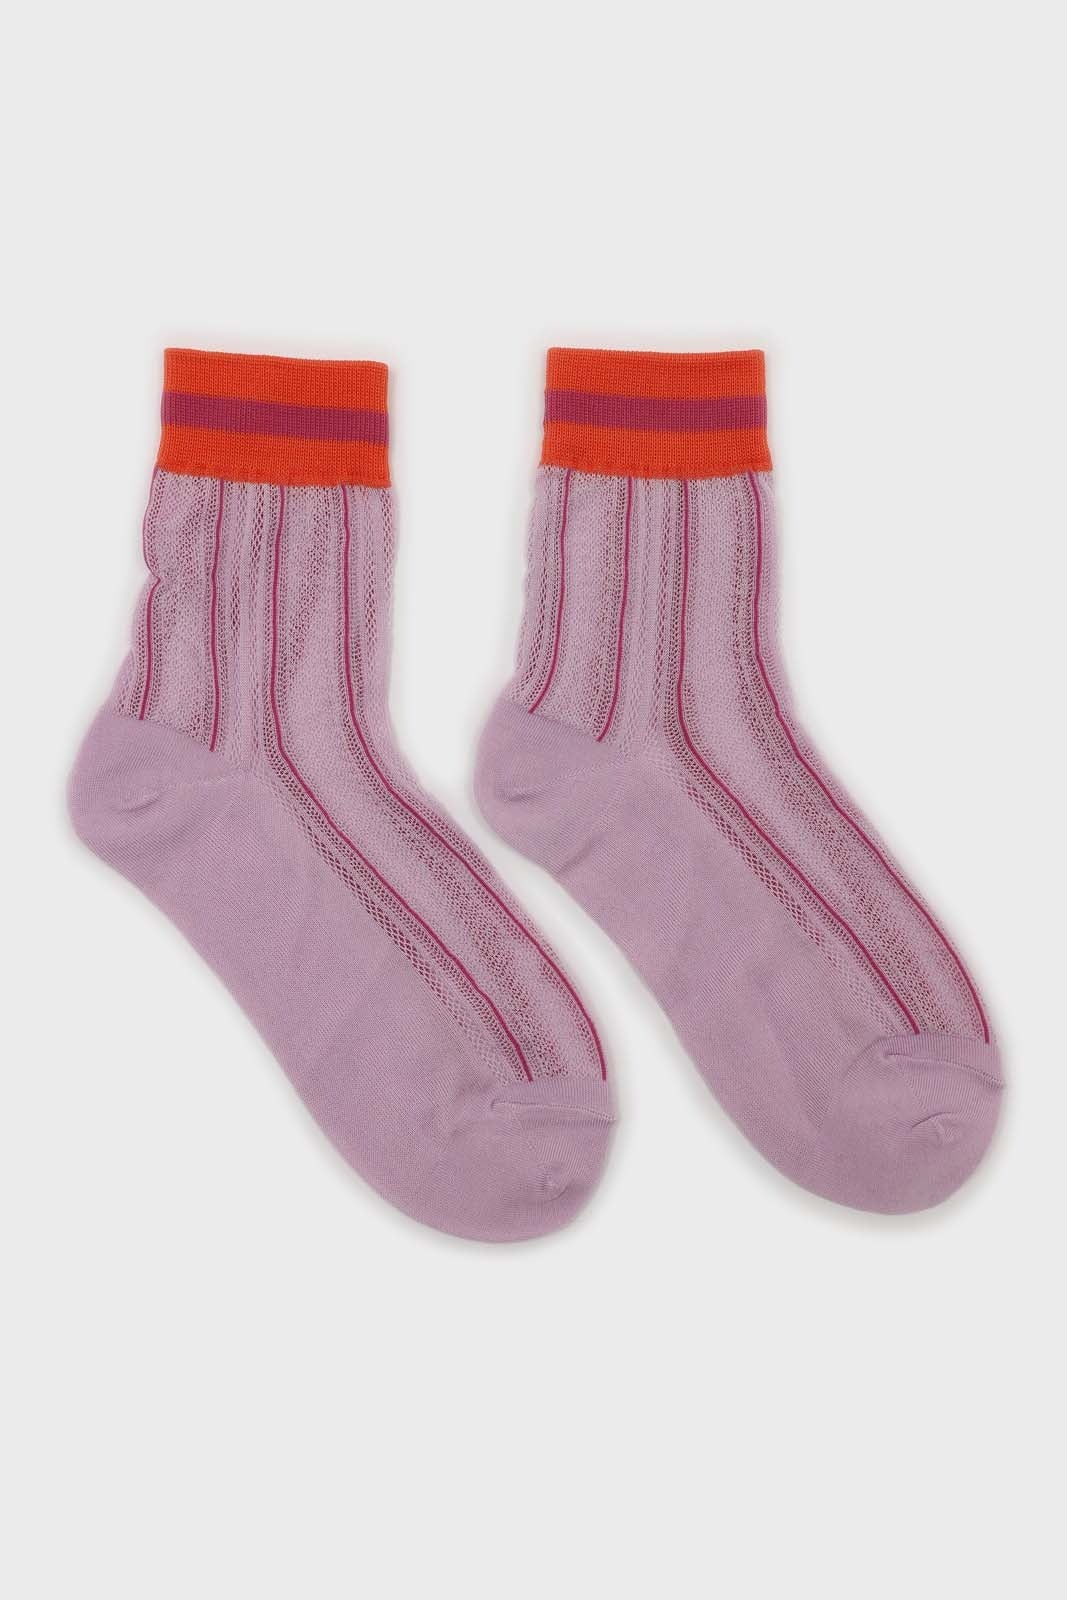 Glassworks + Lilac and Red Striped Socks